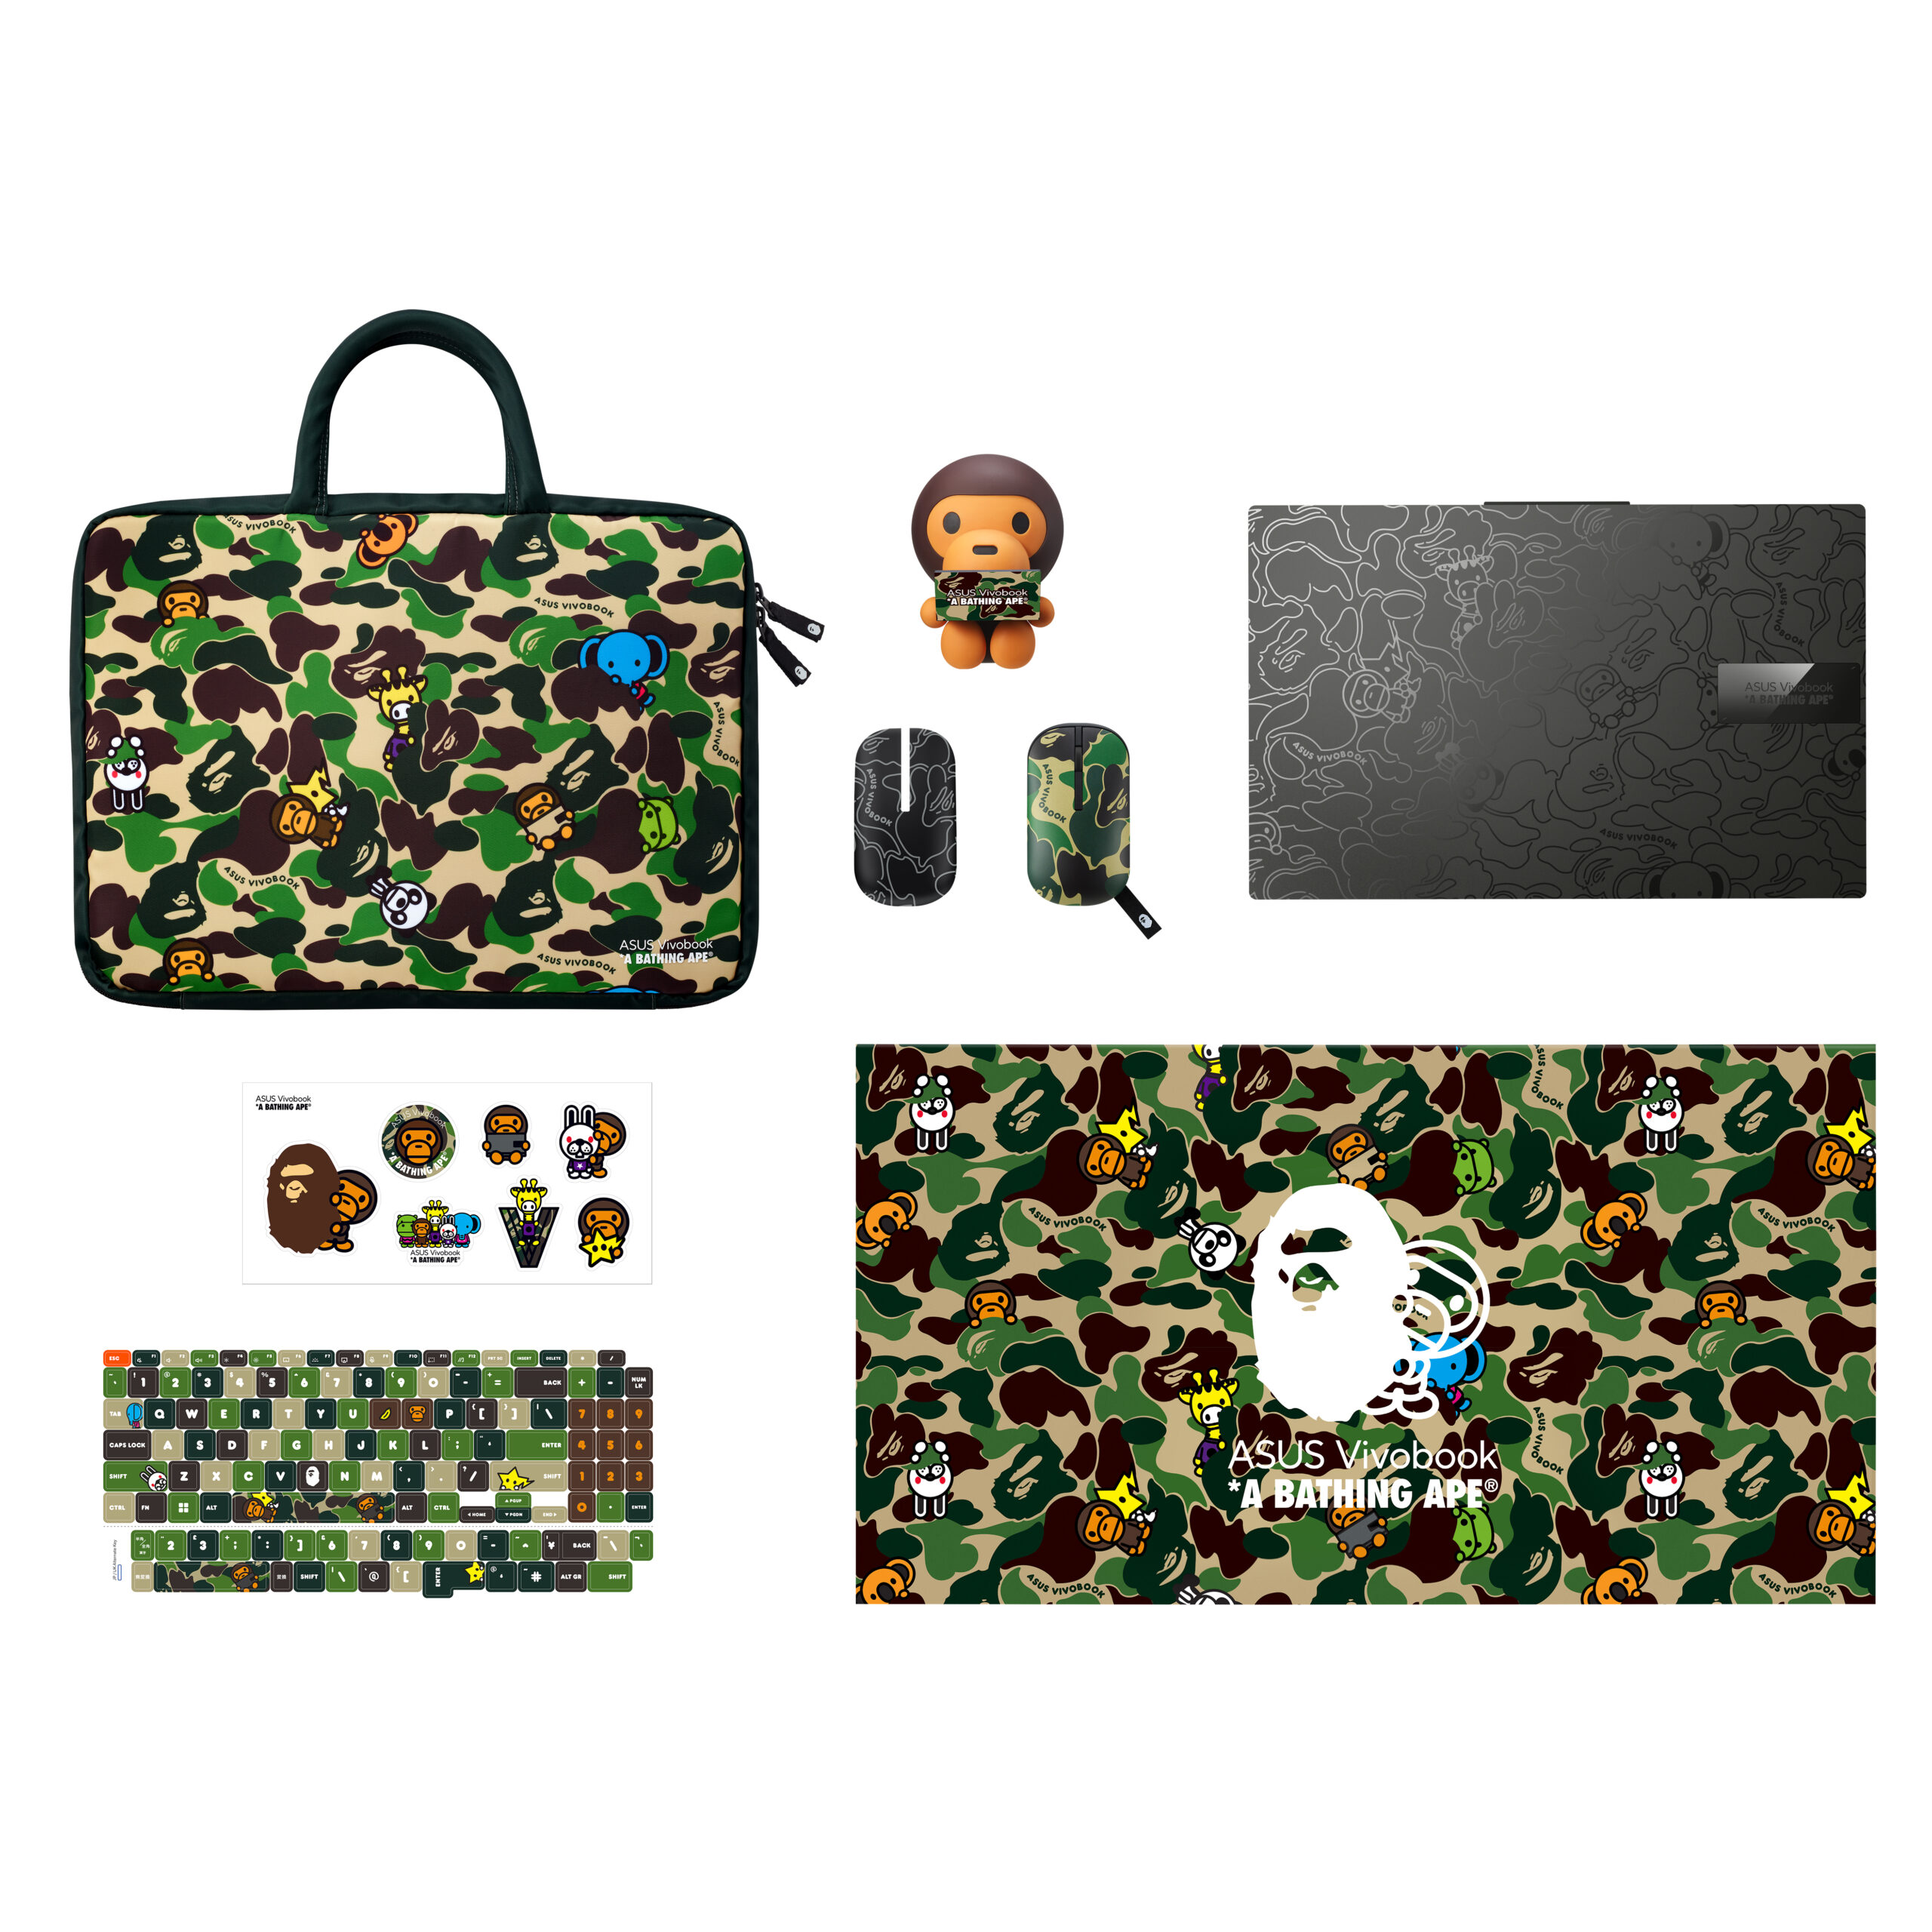 Vivobook S 15 OLED BAPE Edition Green Camo Bundle with Black Laptop overlooking view of black laptops and green camo bundle scaled